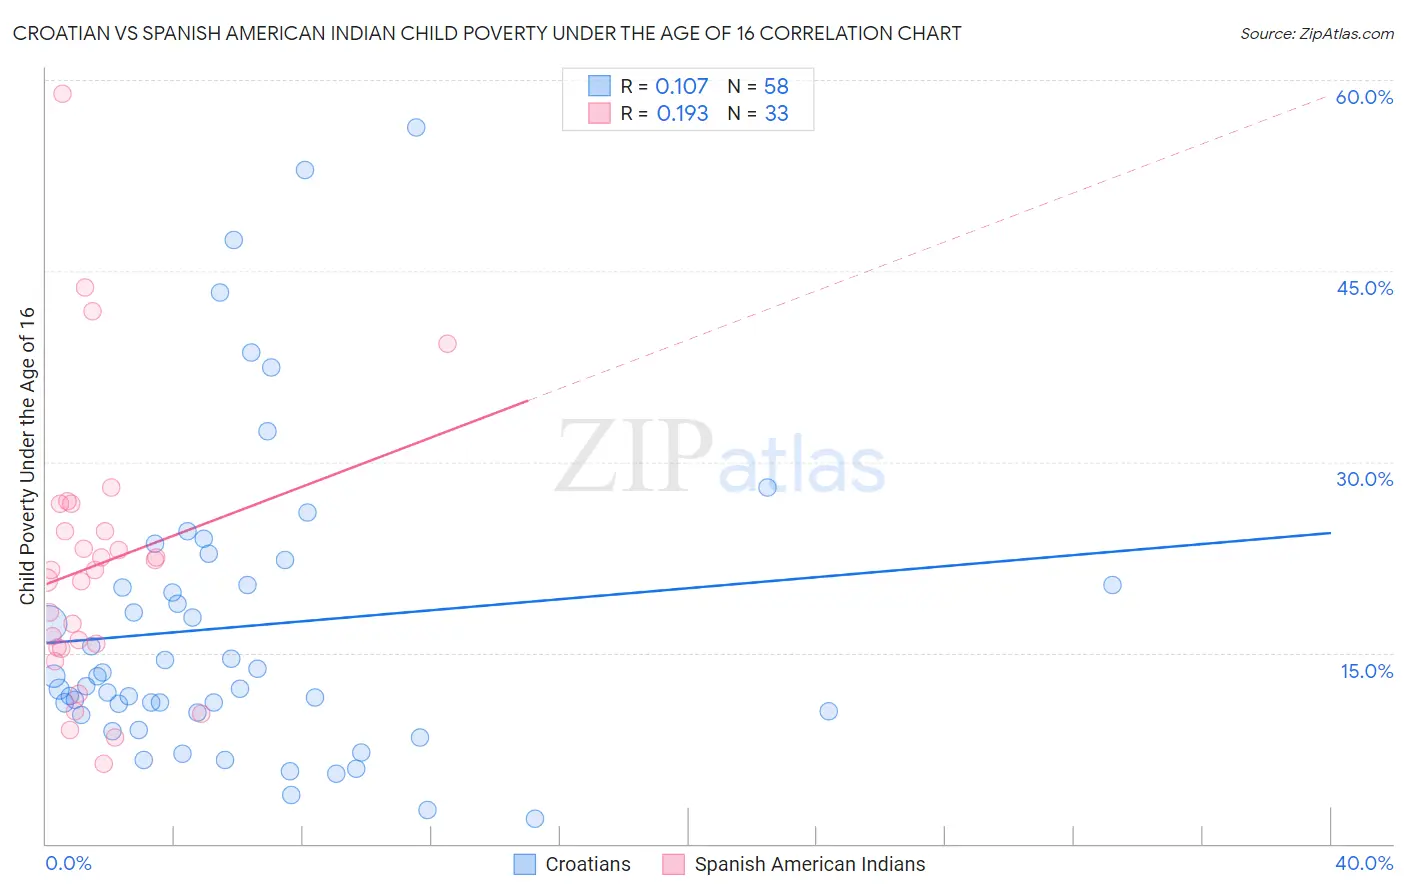 Croatian vs Spanish American Indian Child Poverty Under the Age of 16